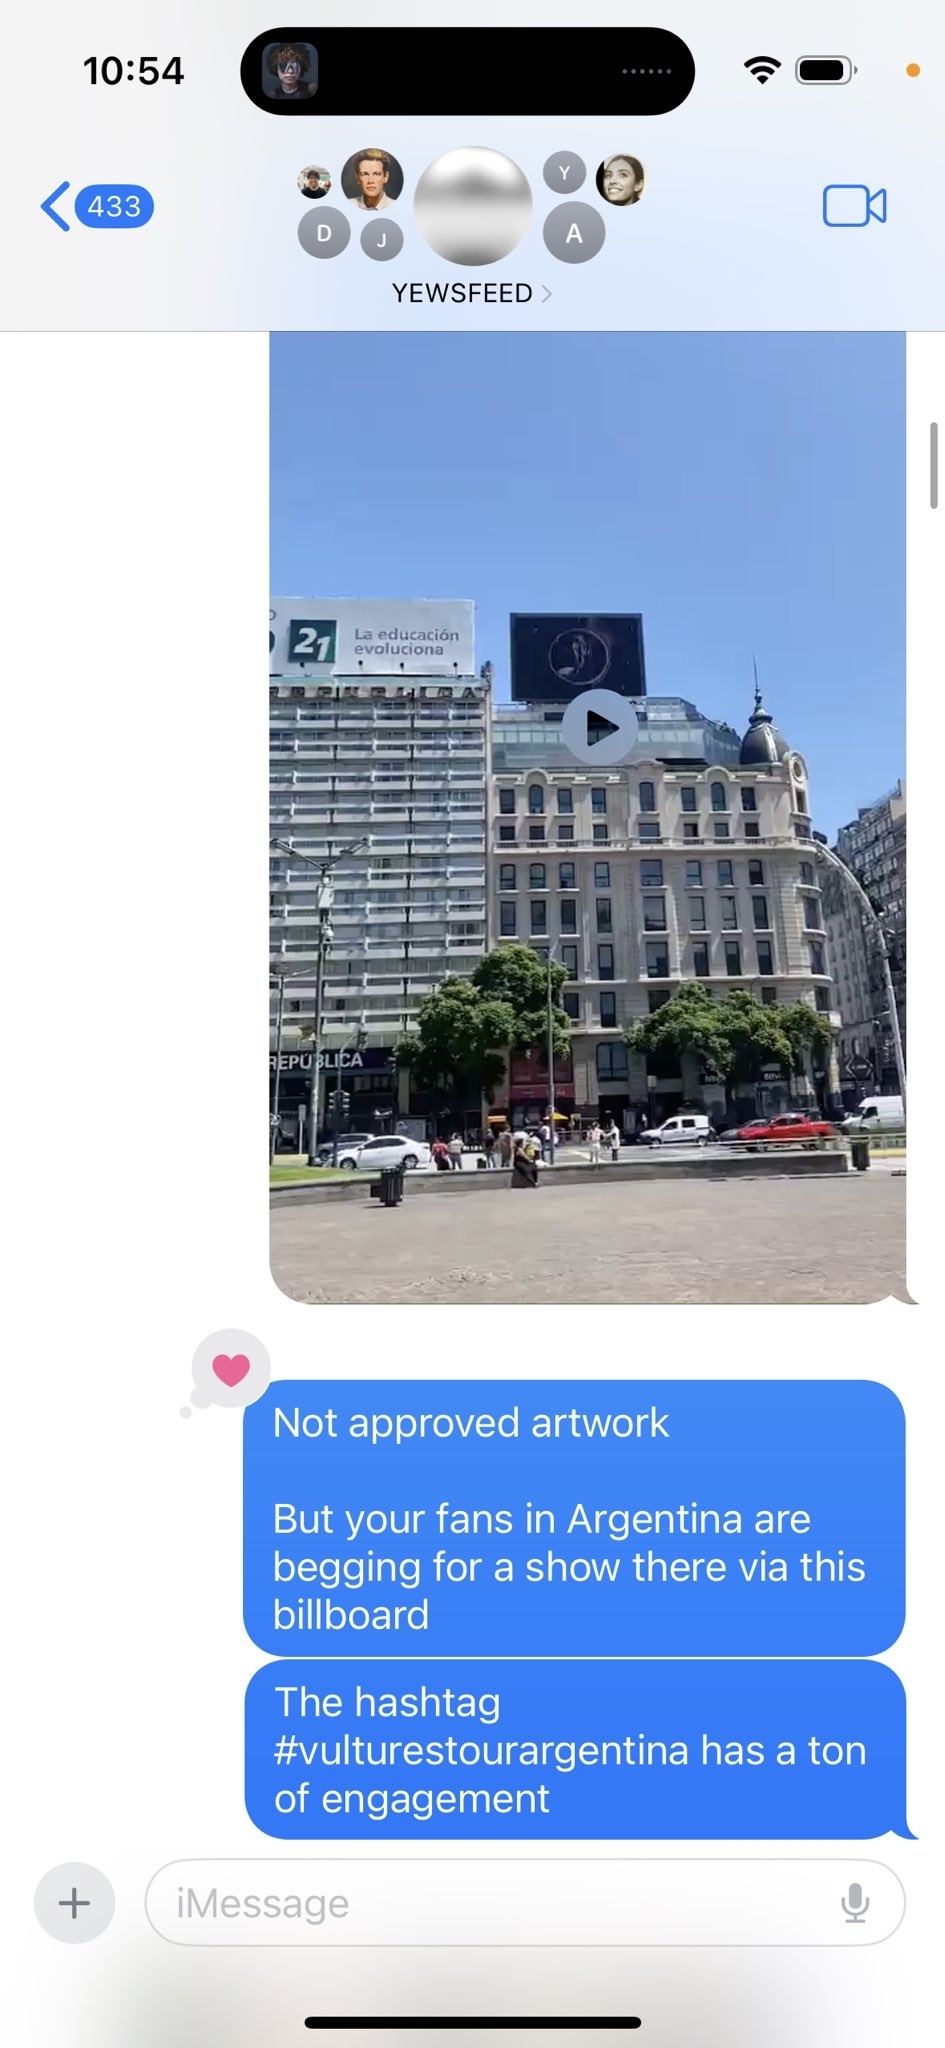 Screenshot of a messaging app with a conversation about a fan-requested music show in Argentina, referenced by a billboard hashtag